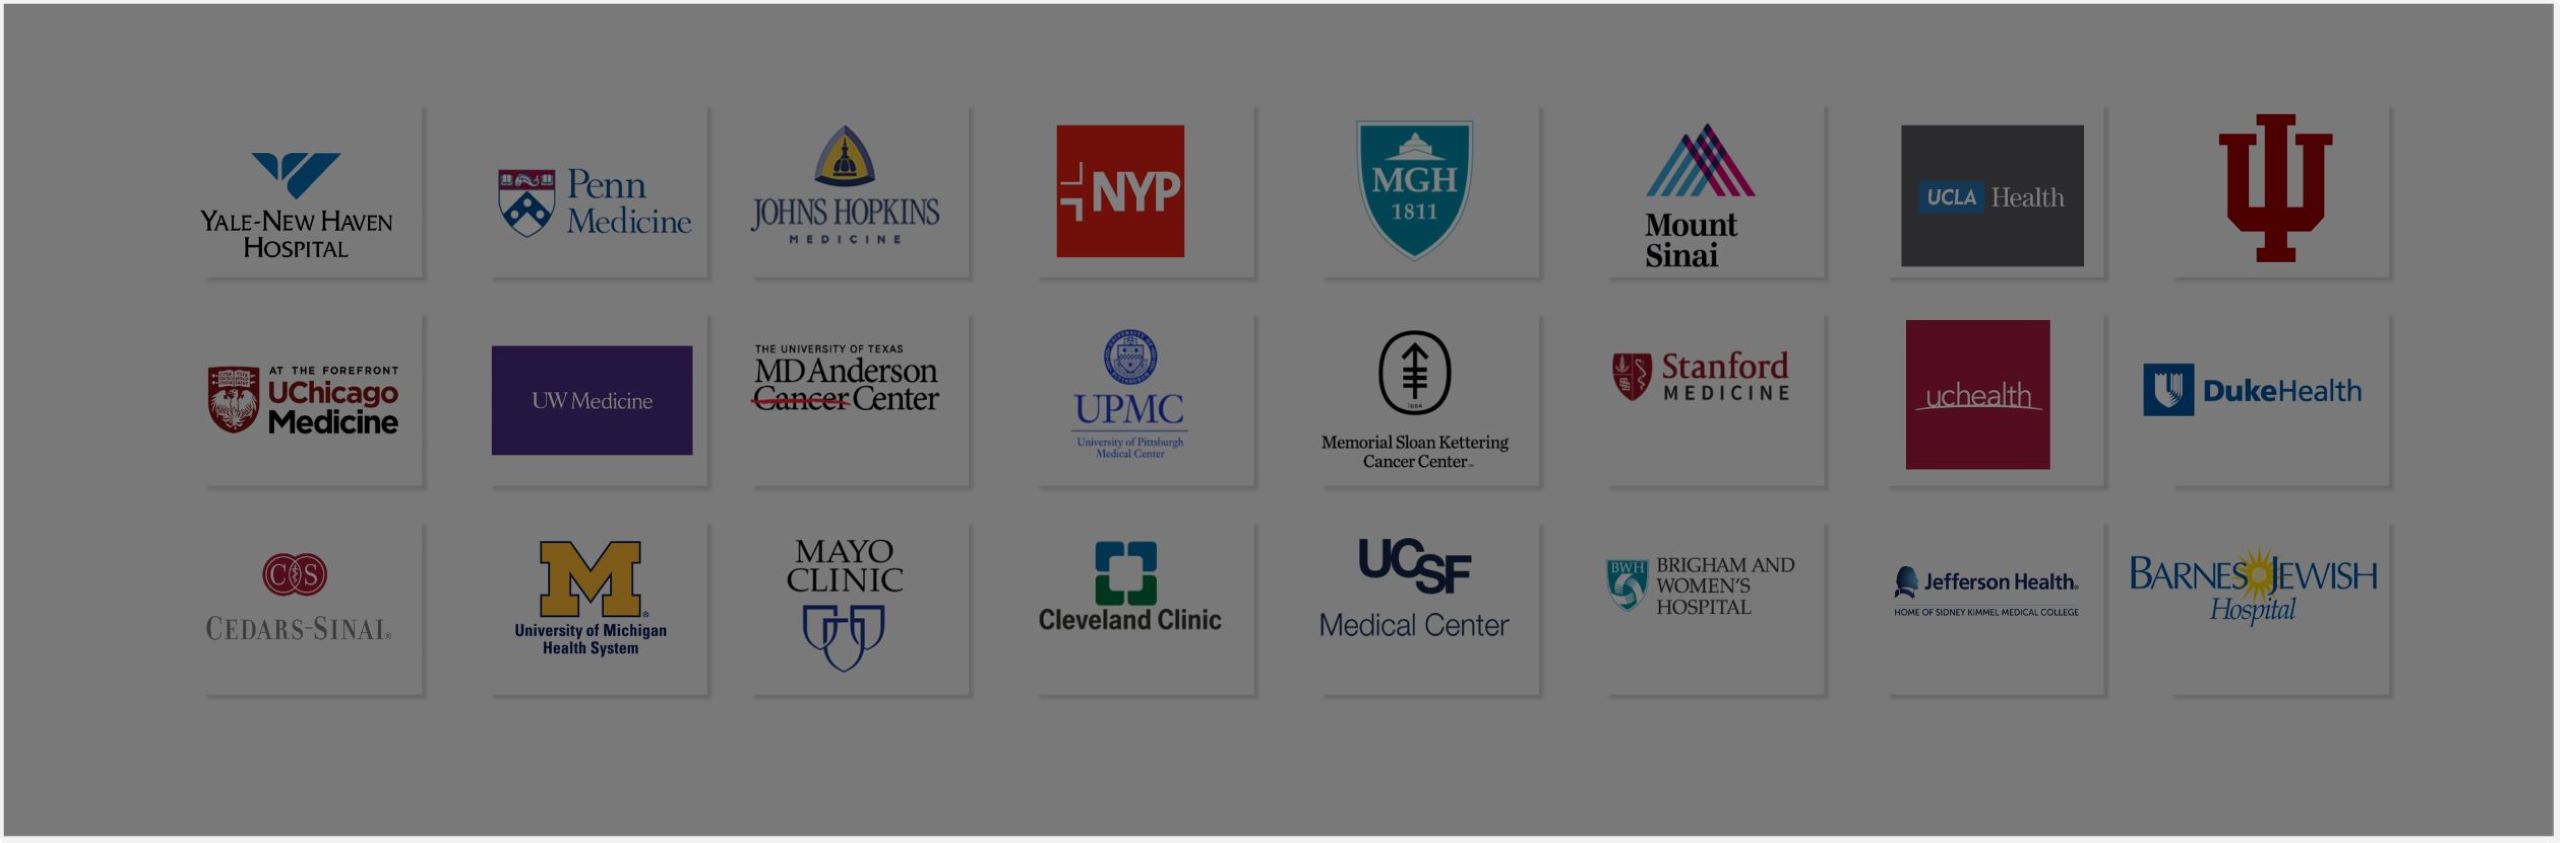 America’s Top Hospitals by Medical Expertise